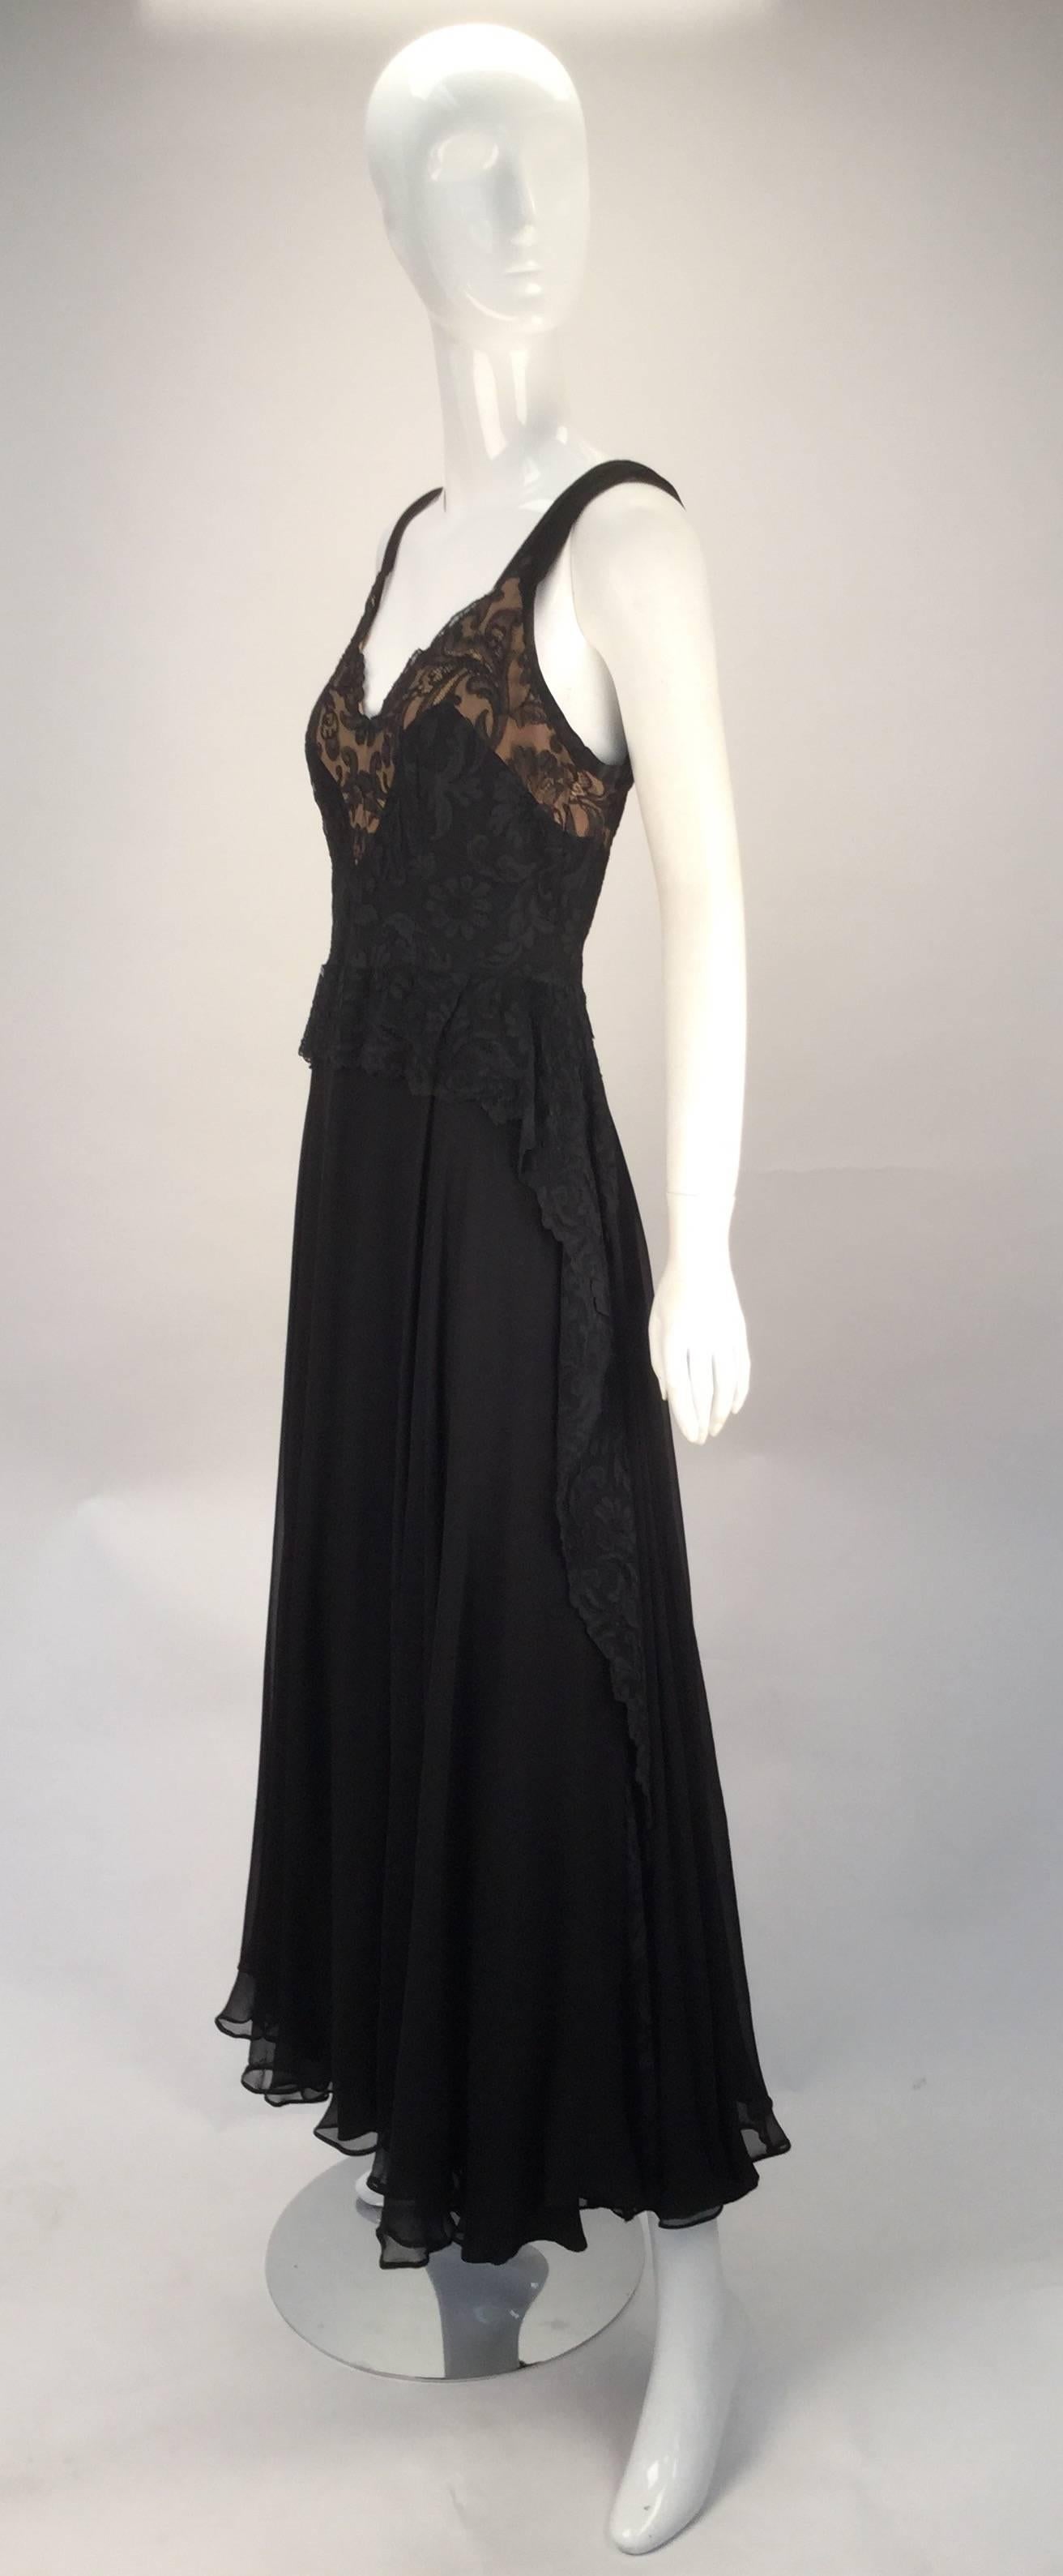 
Wonderful black silk sleeveless evening dress with sweetheart neckline. No label but clearly custom made. The dress features a black lace/net overlay on bodice, with the lace creating a peplum design at front waist. Flounce down each side of the